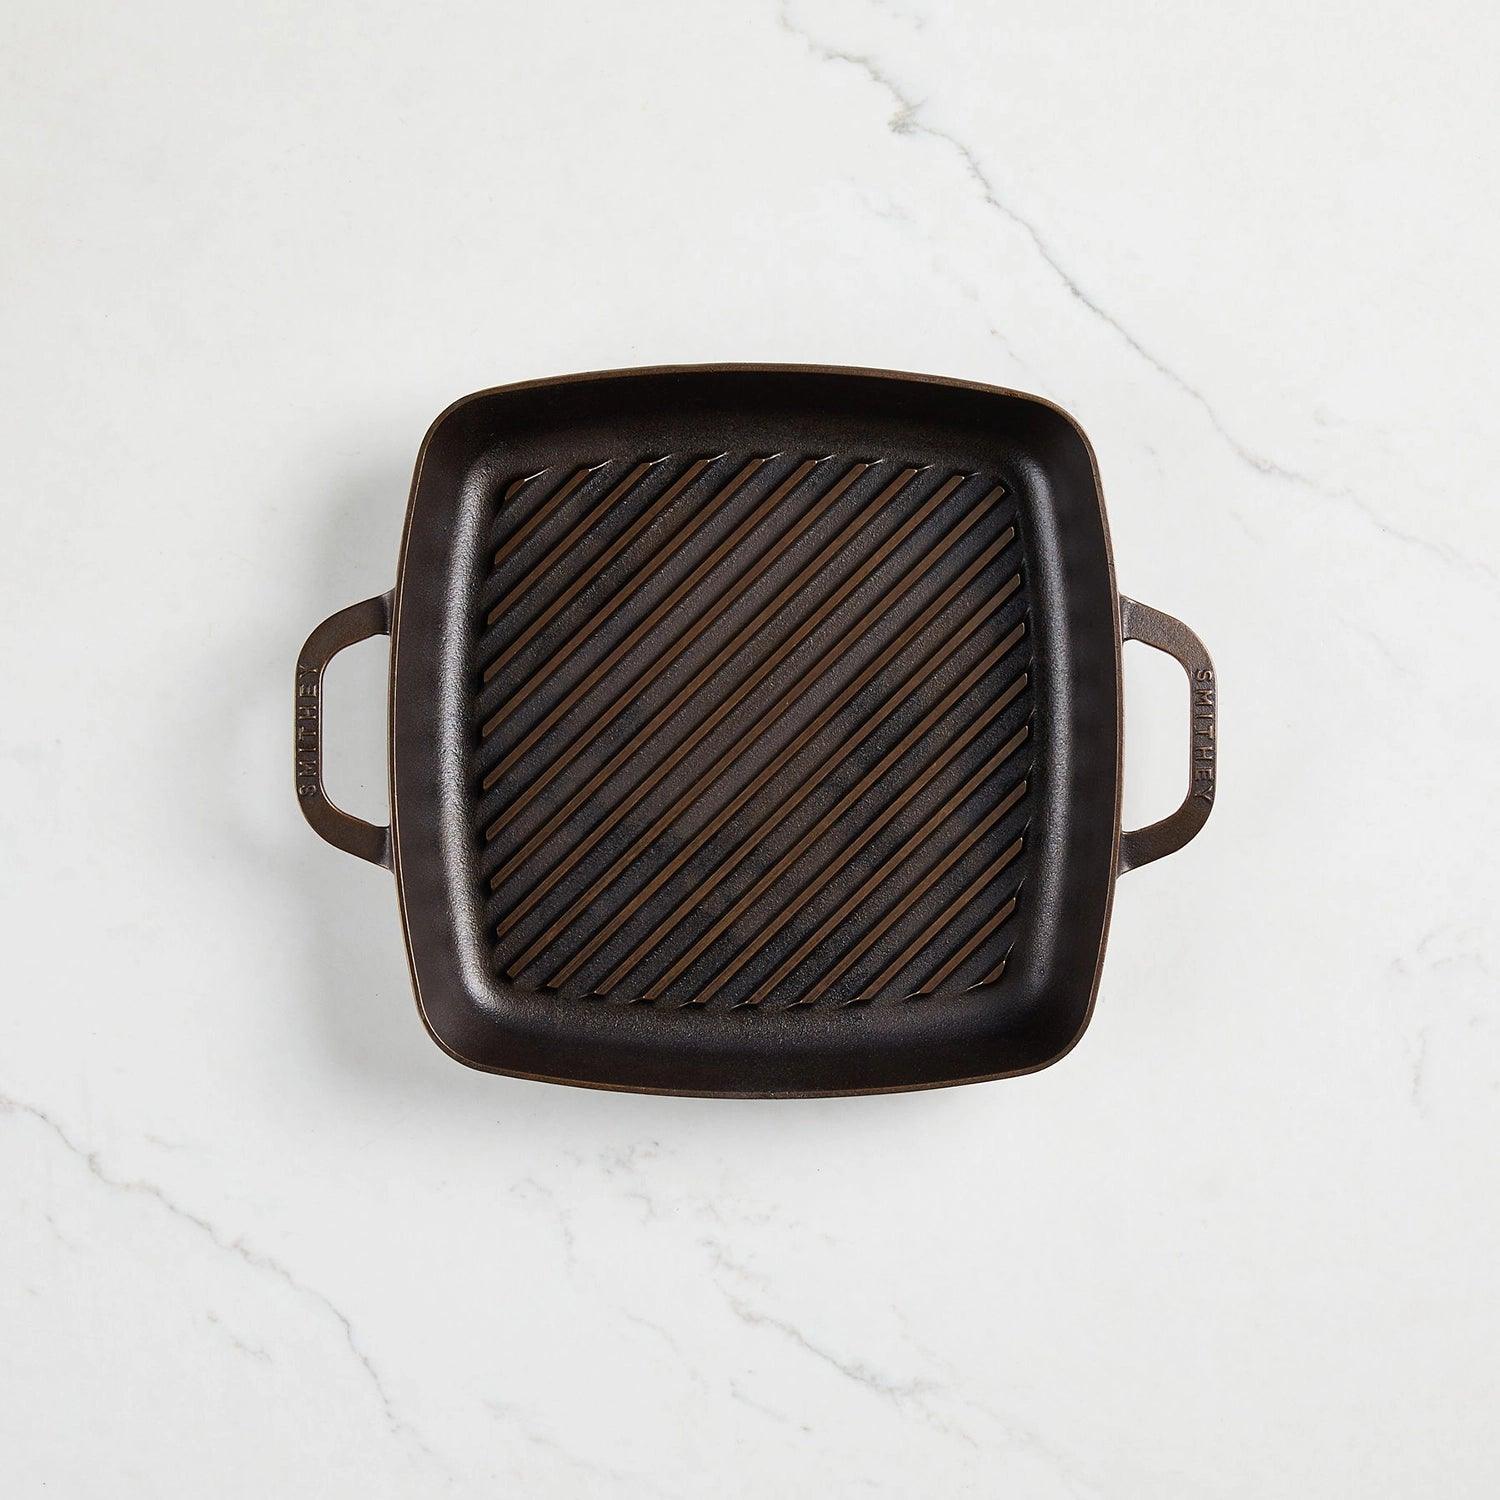 No. 12 Cast Iron Grill Pan - Southern Crafted